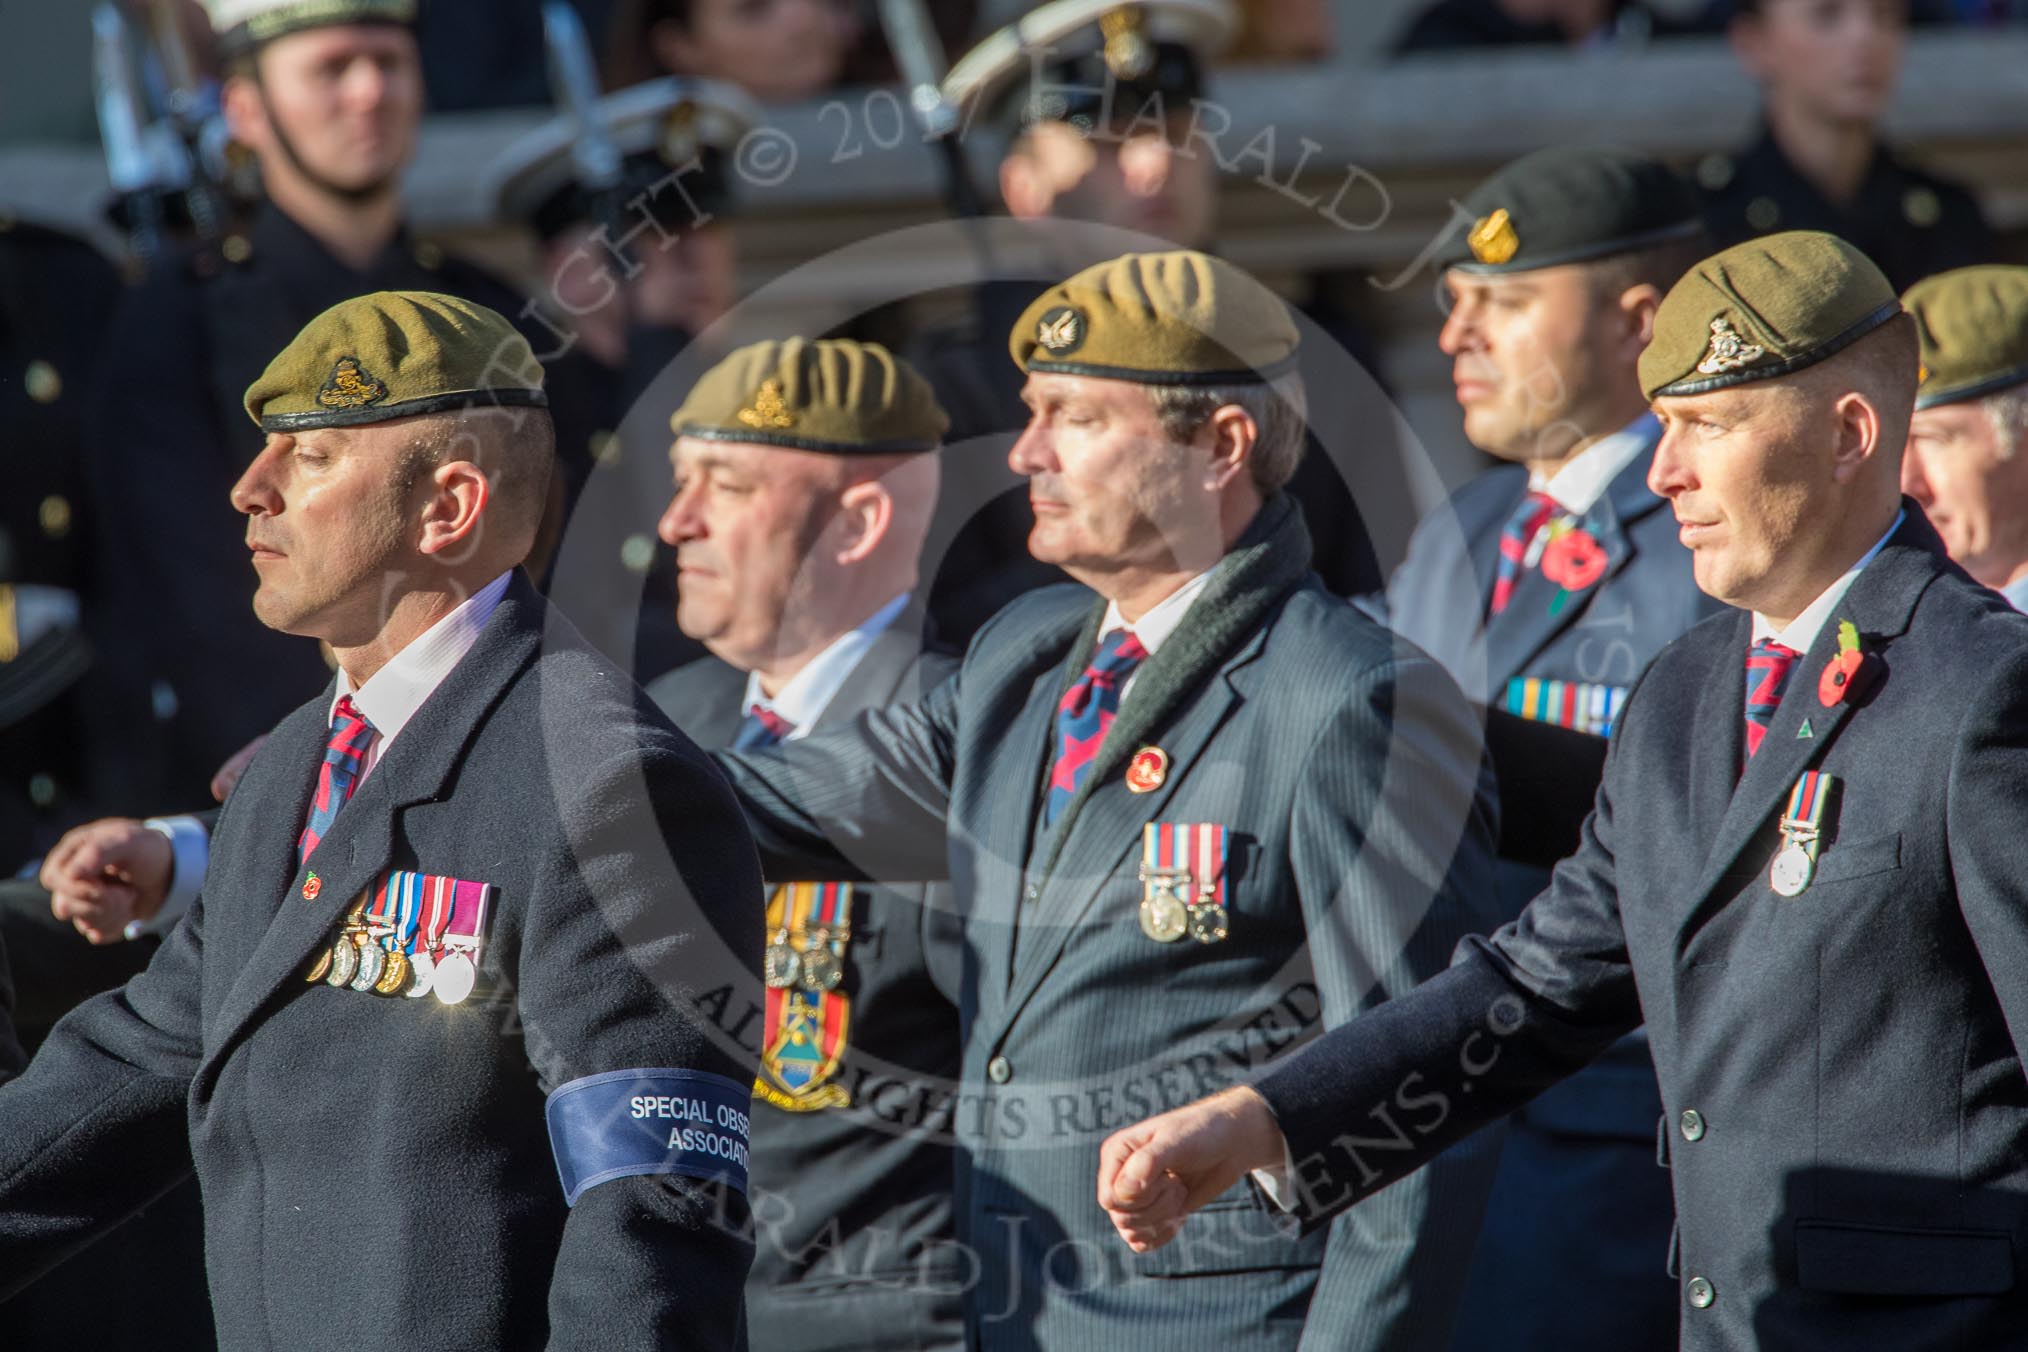 Special Observer Association (Group B27, 26 members) during the Royal British Legion March Past on Remembrance Sunday at the Cenotaph, Whitehall, Westminster, London, 11 November 2018, 12:12.